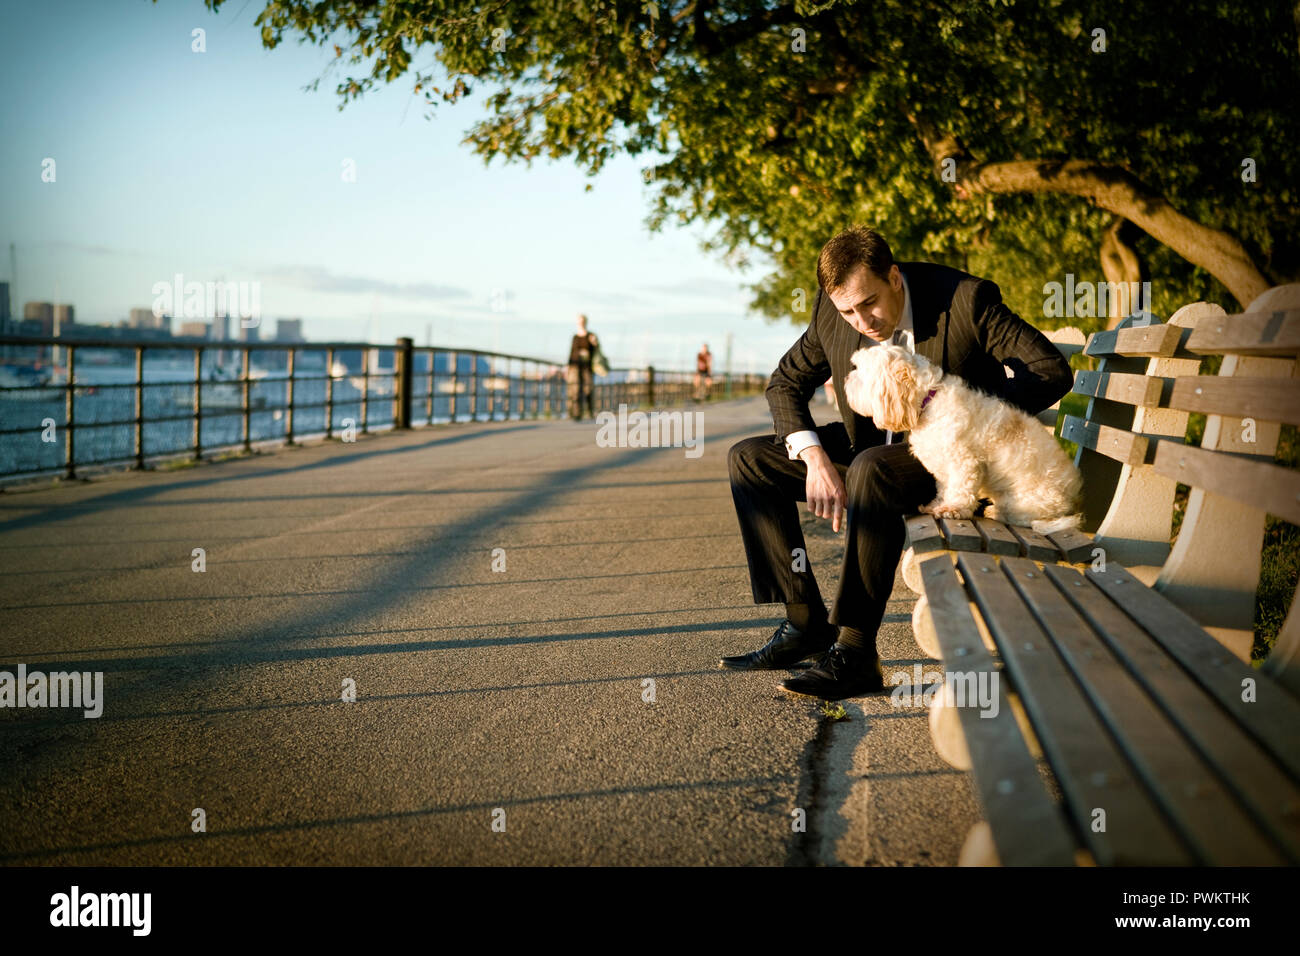 Mid-adult businessman sitting on a bench with his dog. Stock Photo